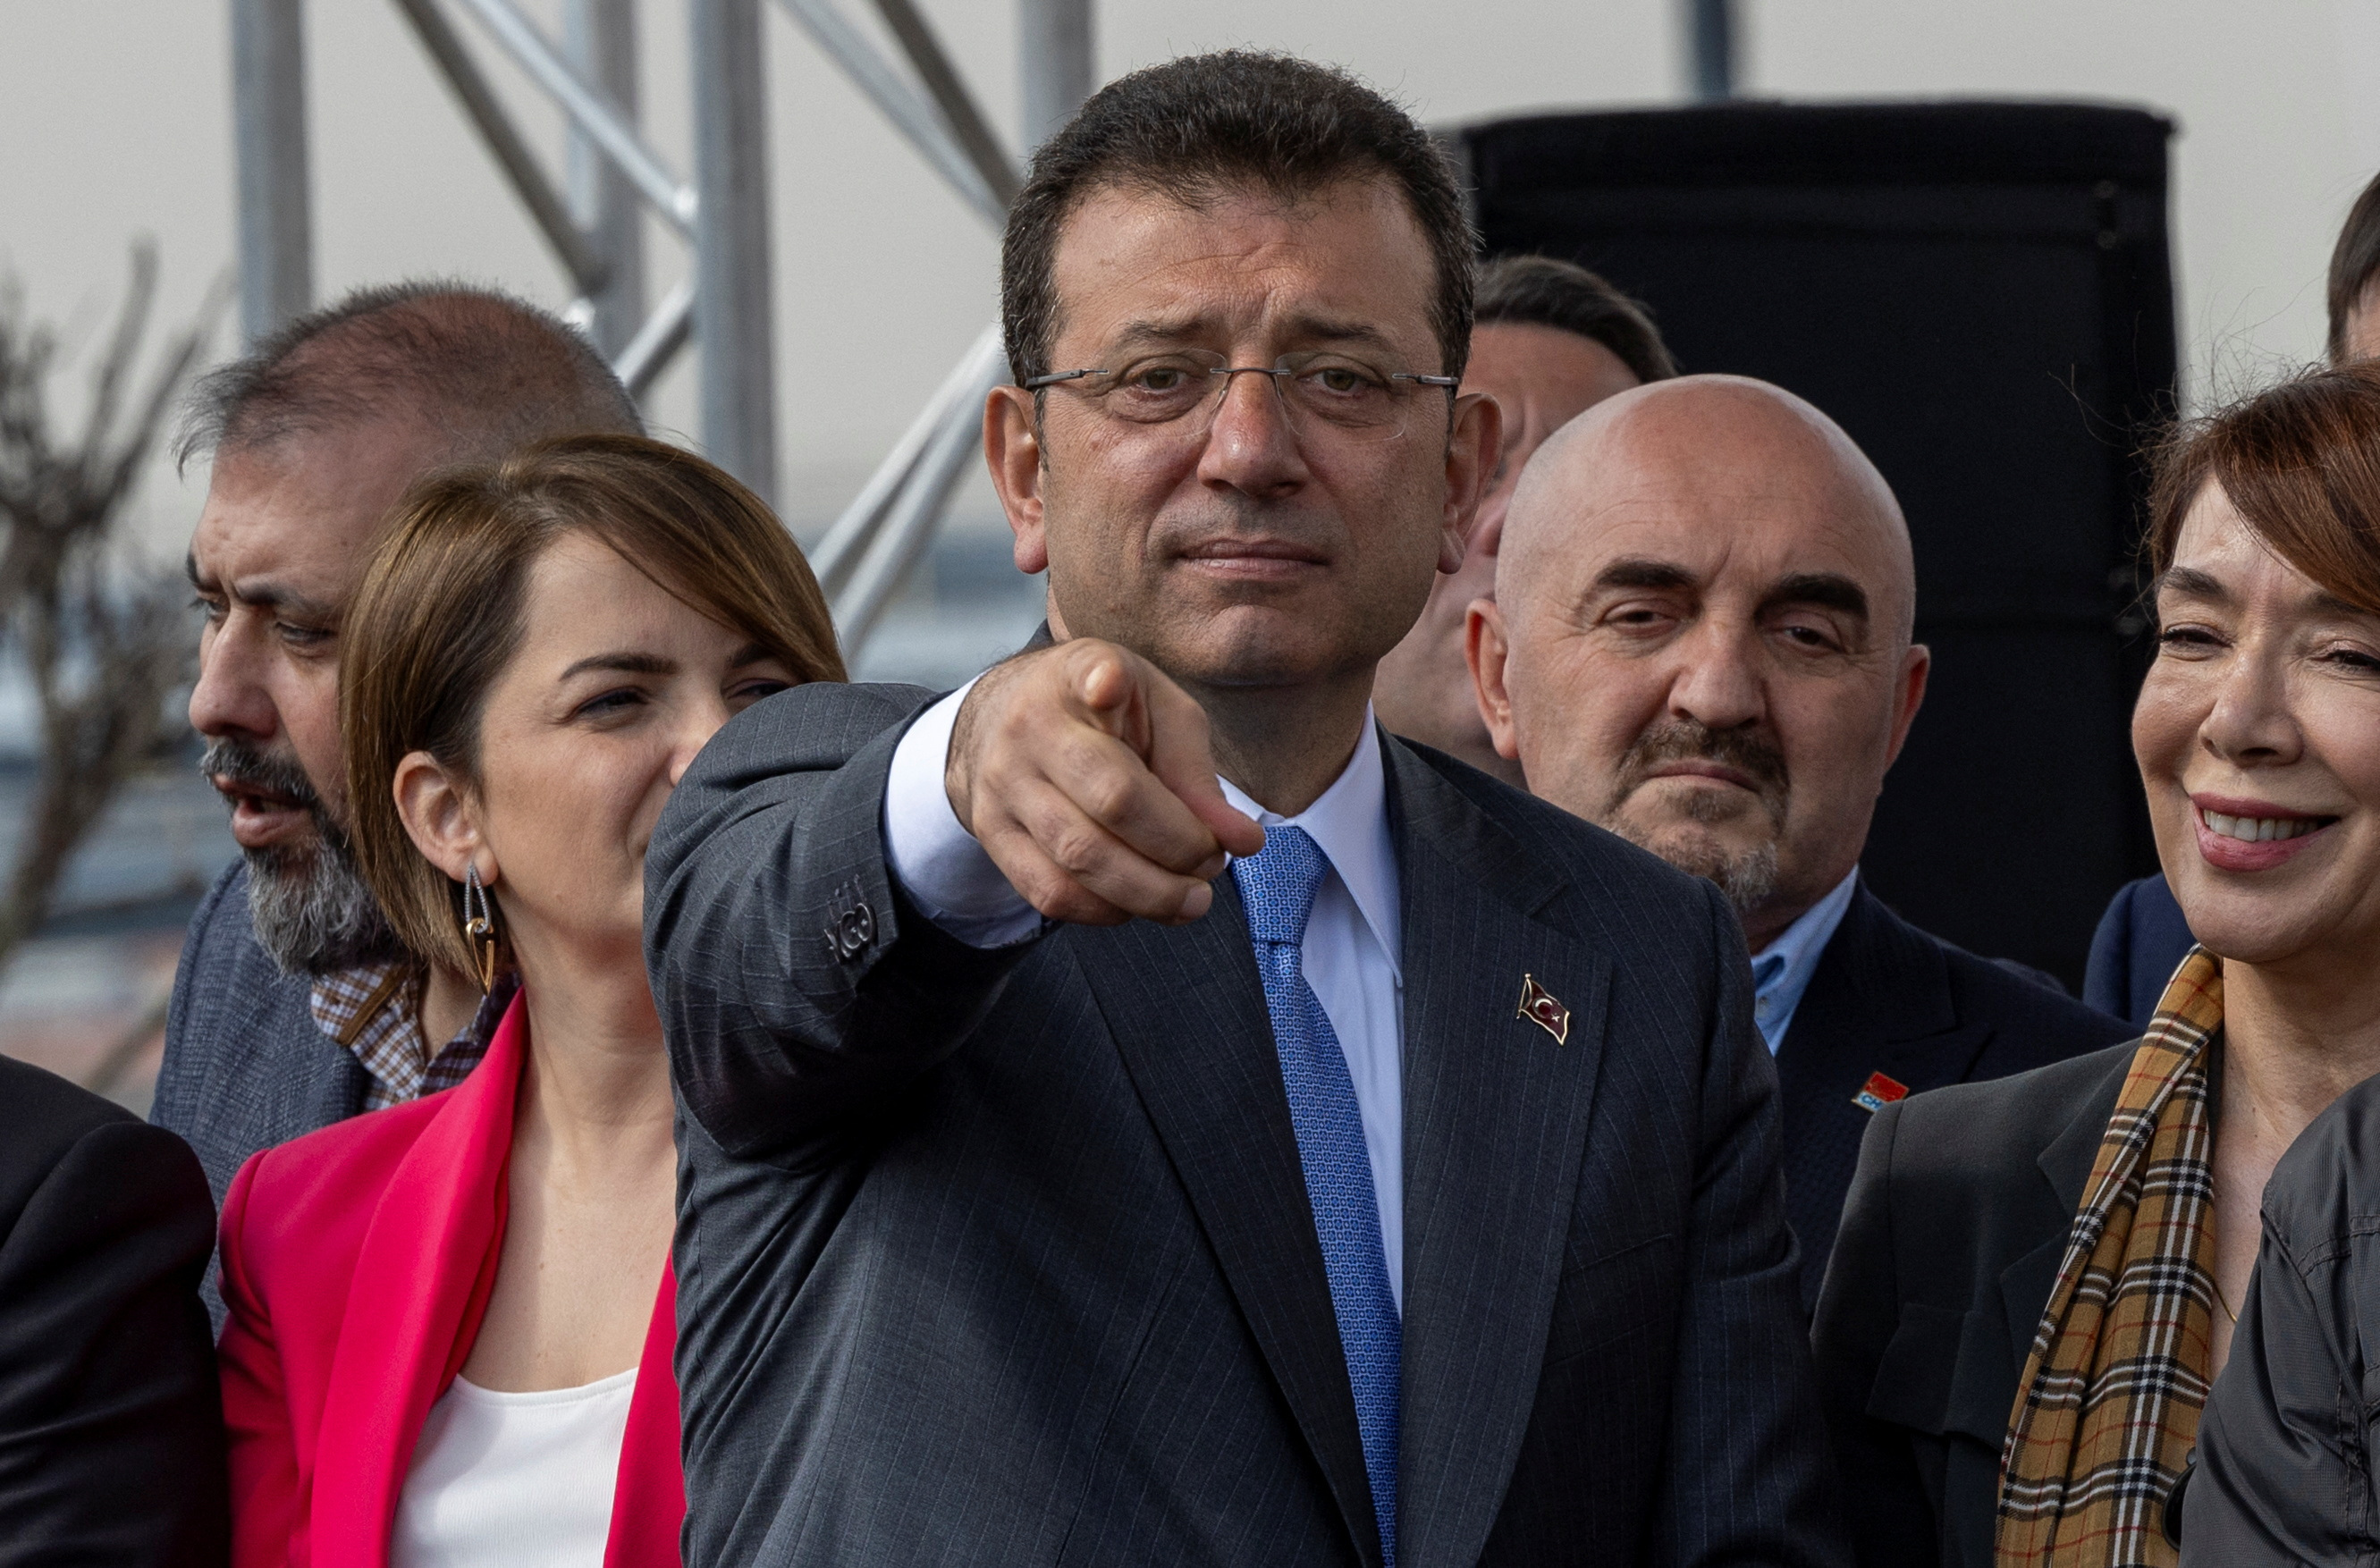 Turkey local elections A test for Erdogan and rival Imamoglu Reuters